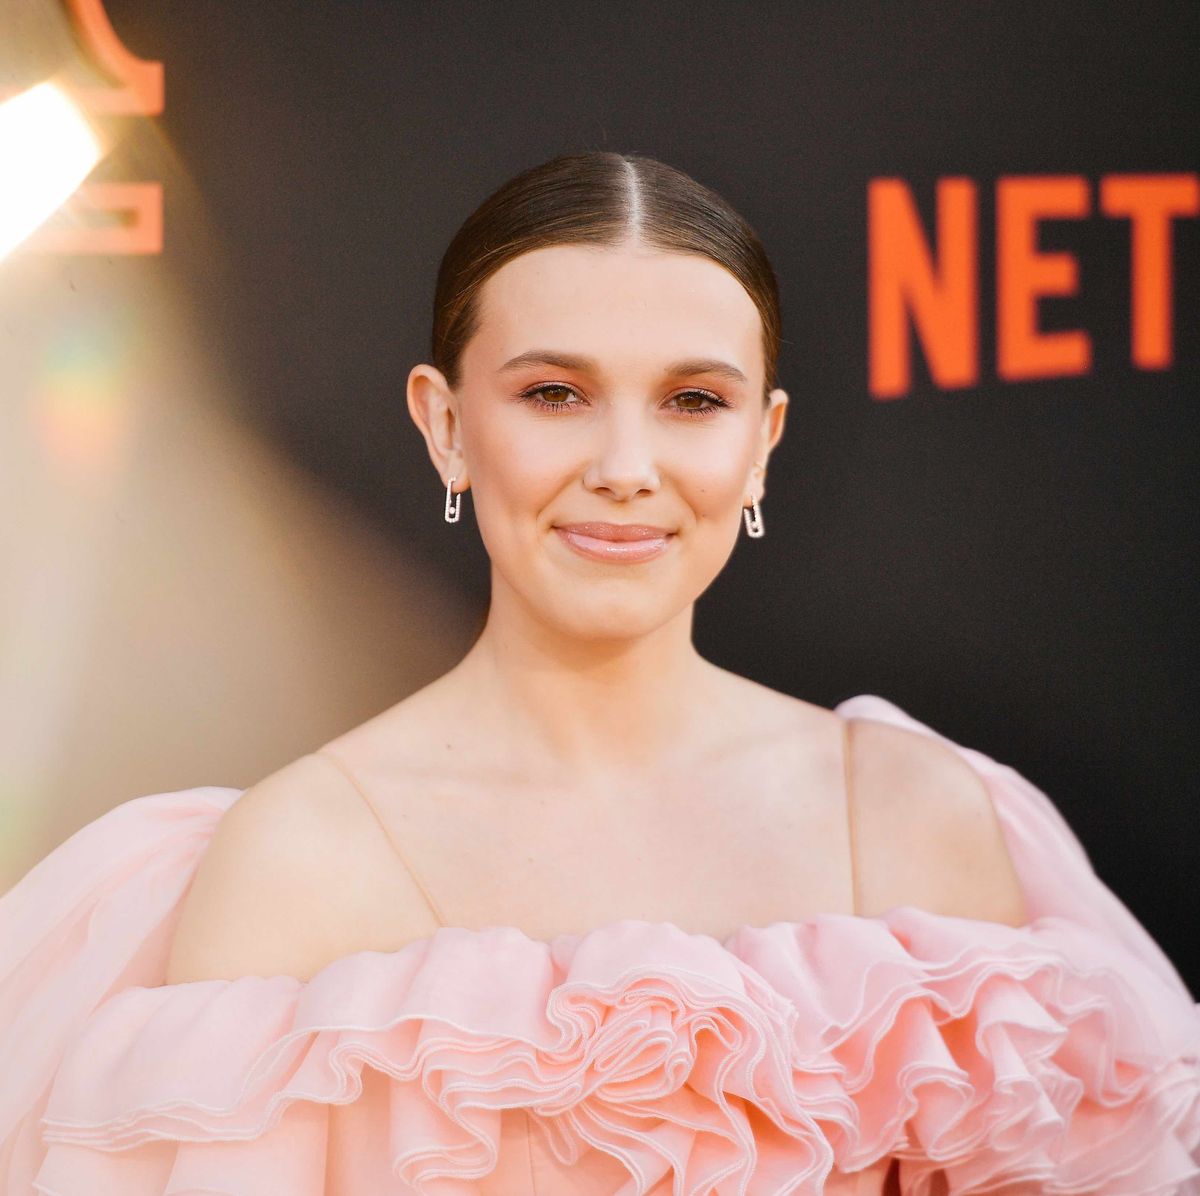 Millie Bobby Brown on myCast - Fan Casting Your Favorite Stories